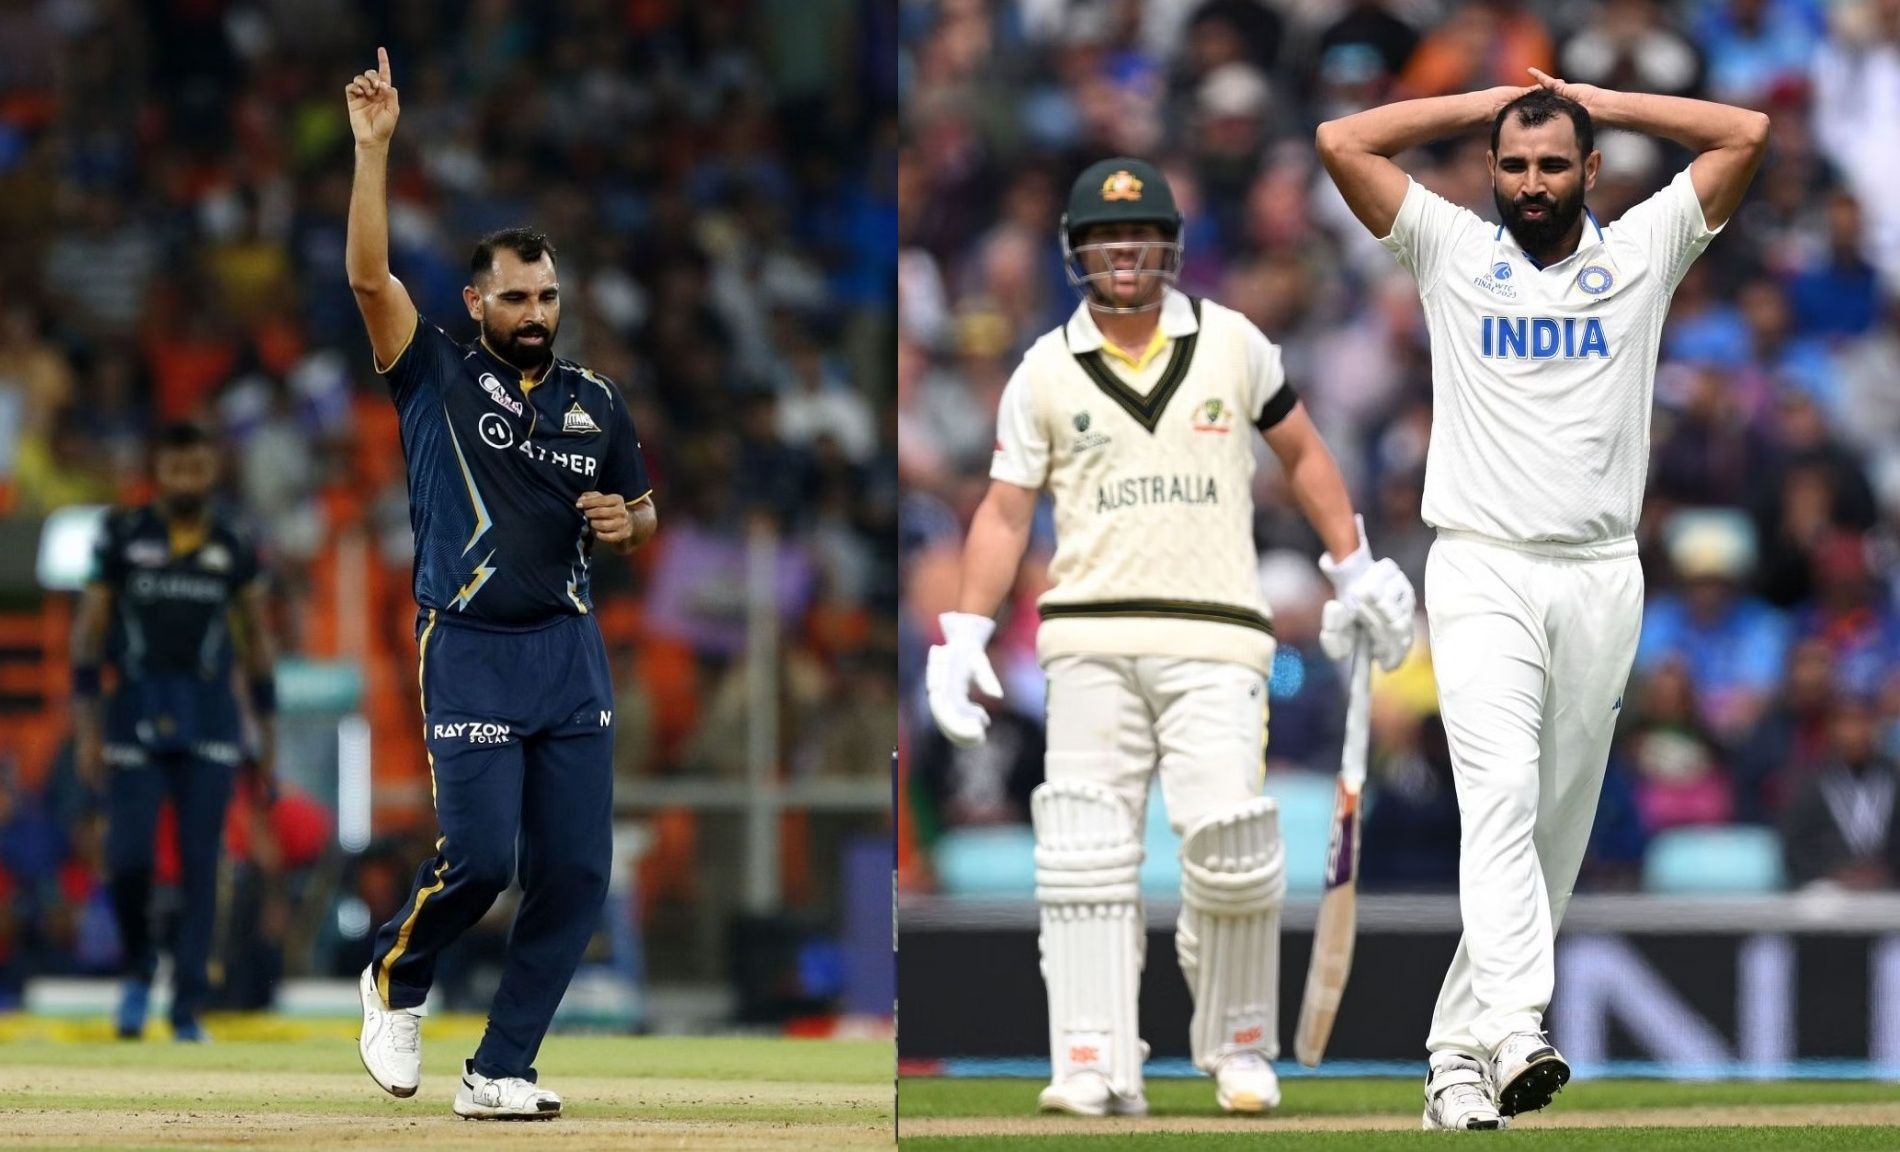 Mohammed Shami experienced contrasting images in the IPL and the WTC final. (Pics: Getty Images)